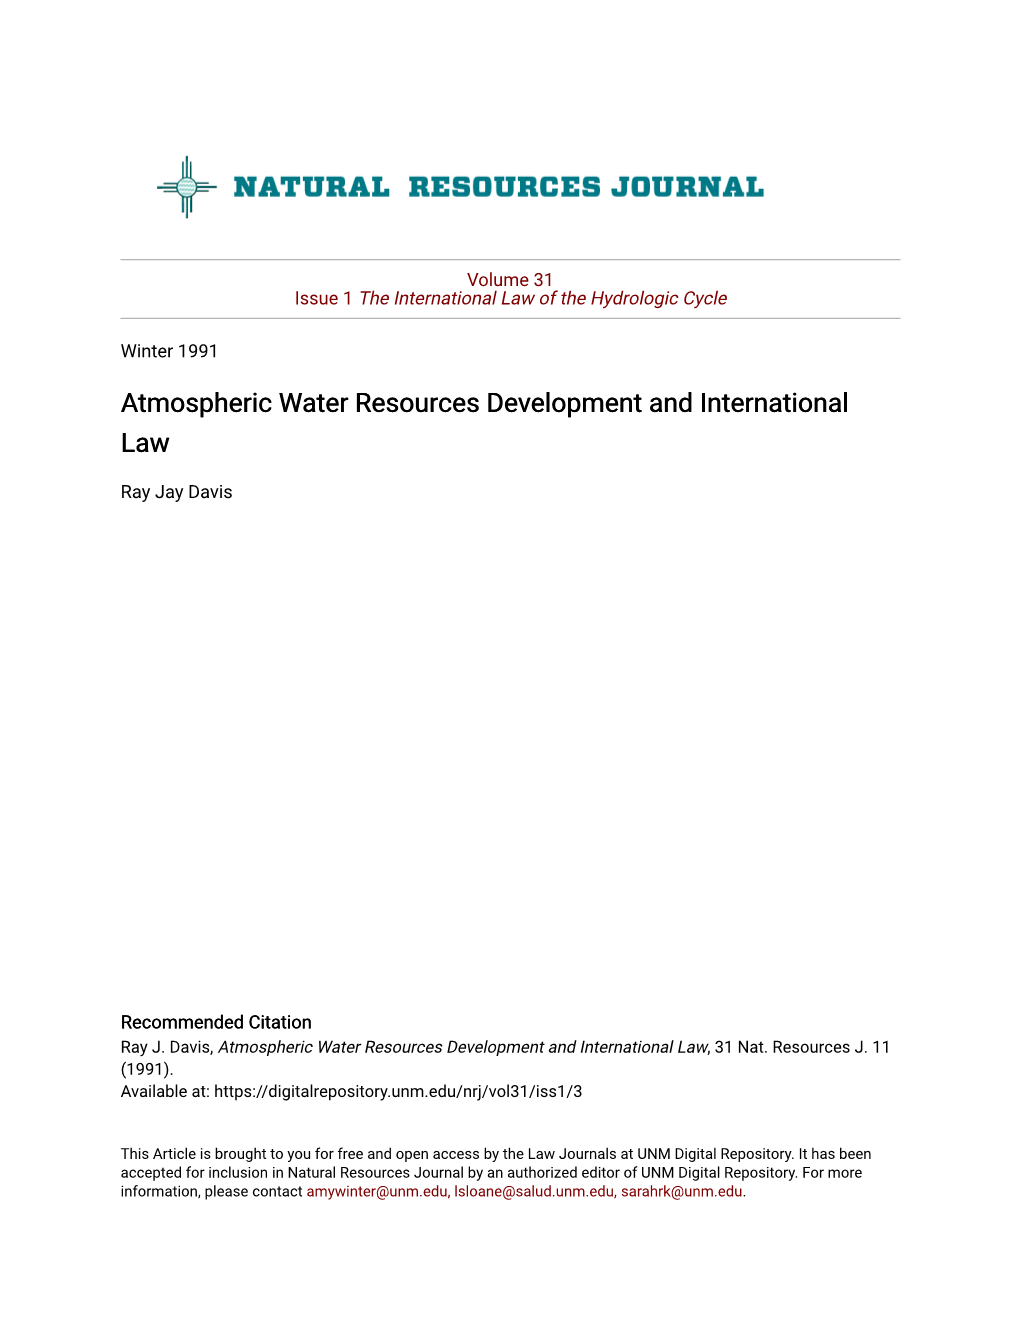 Atmospheric Water Resources Development and International Law